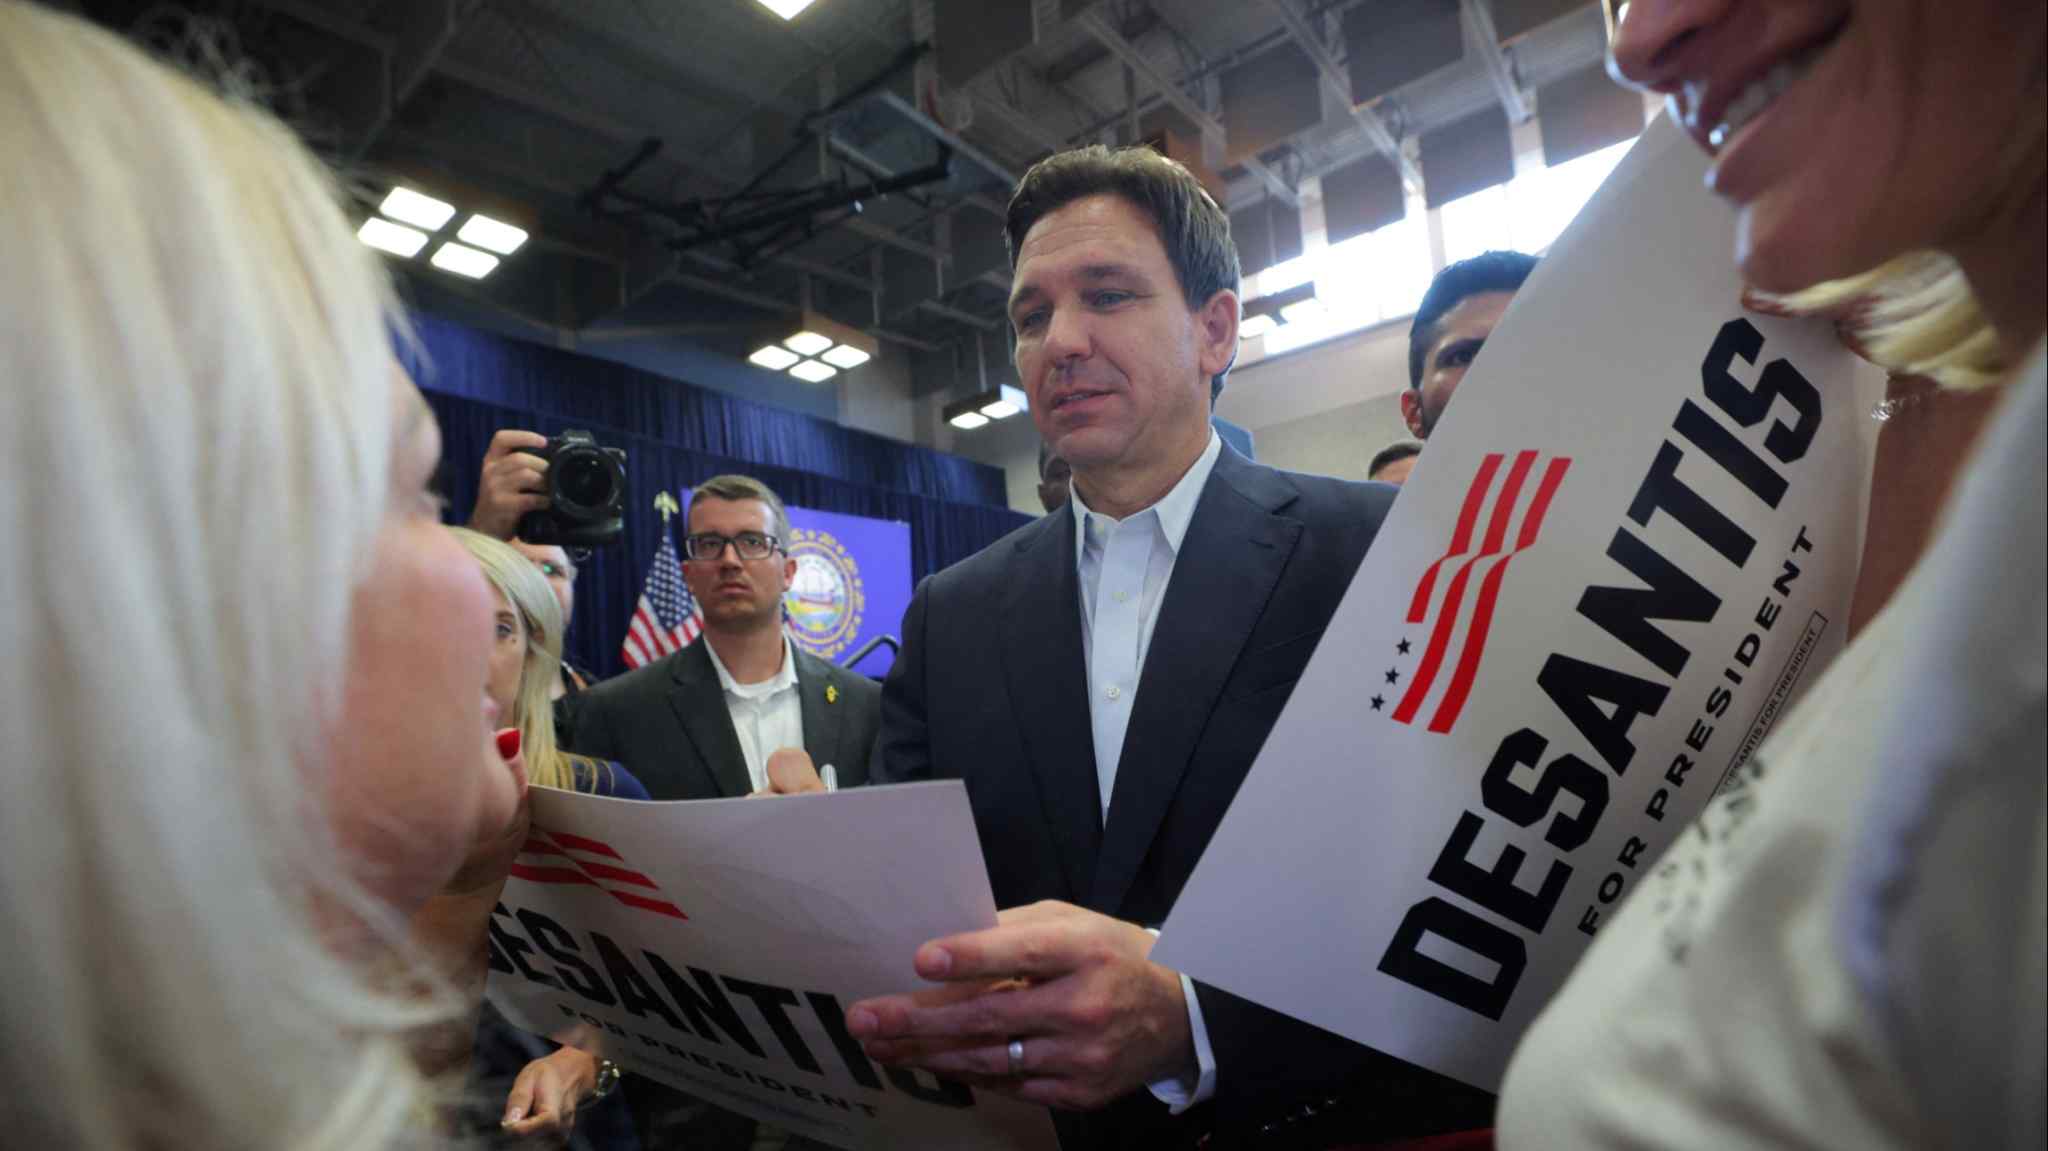 Ron DeSantis works to soften his image on the campaign trail